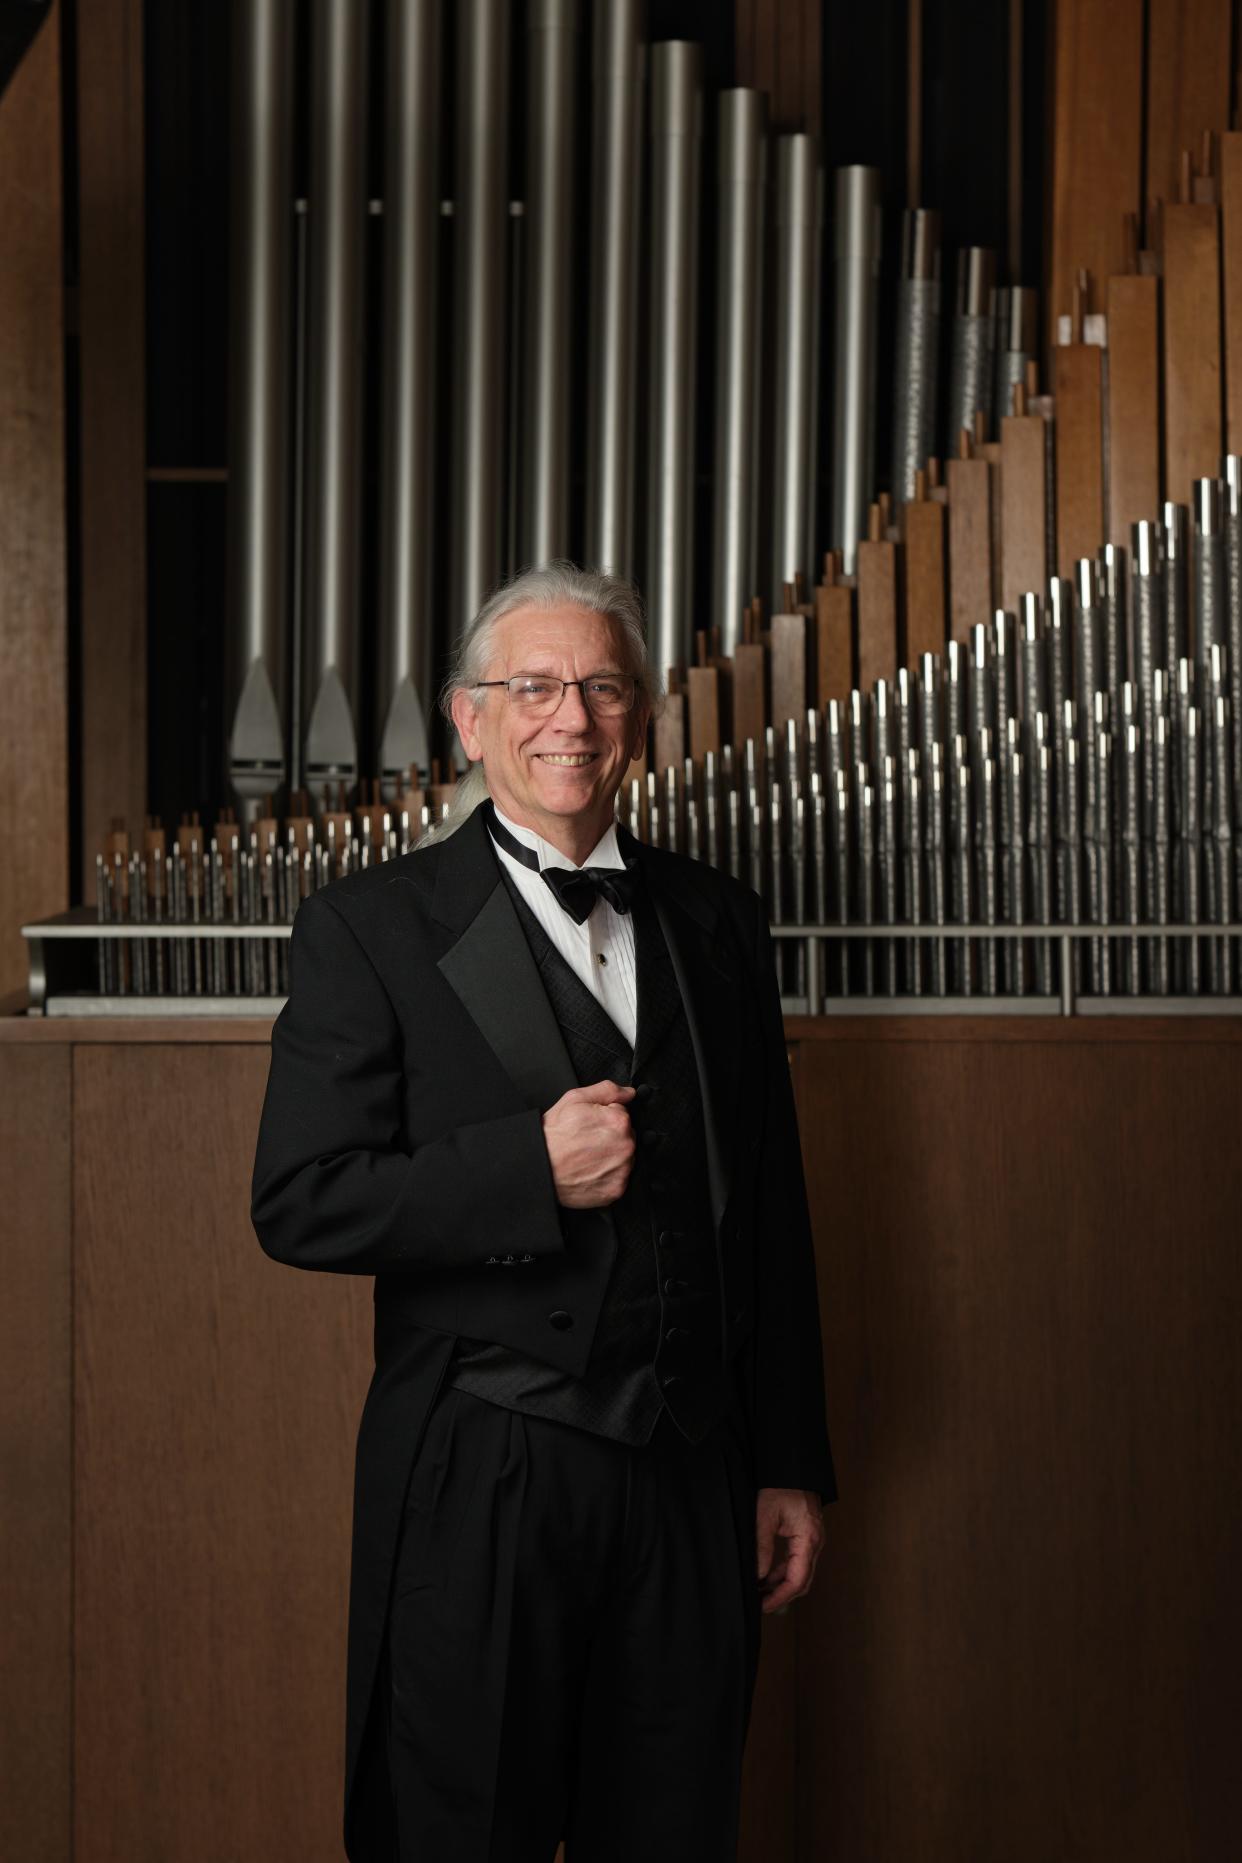 Steve Hoifeldt is the founder and longtime director of Good Company, a women's chorus that will perform a concert Sunday in Ames.